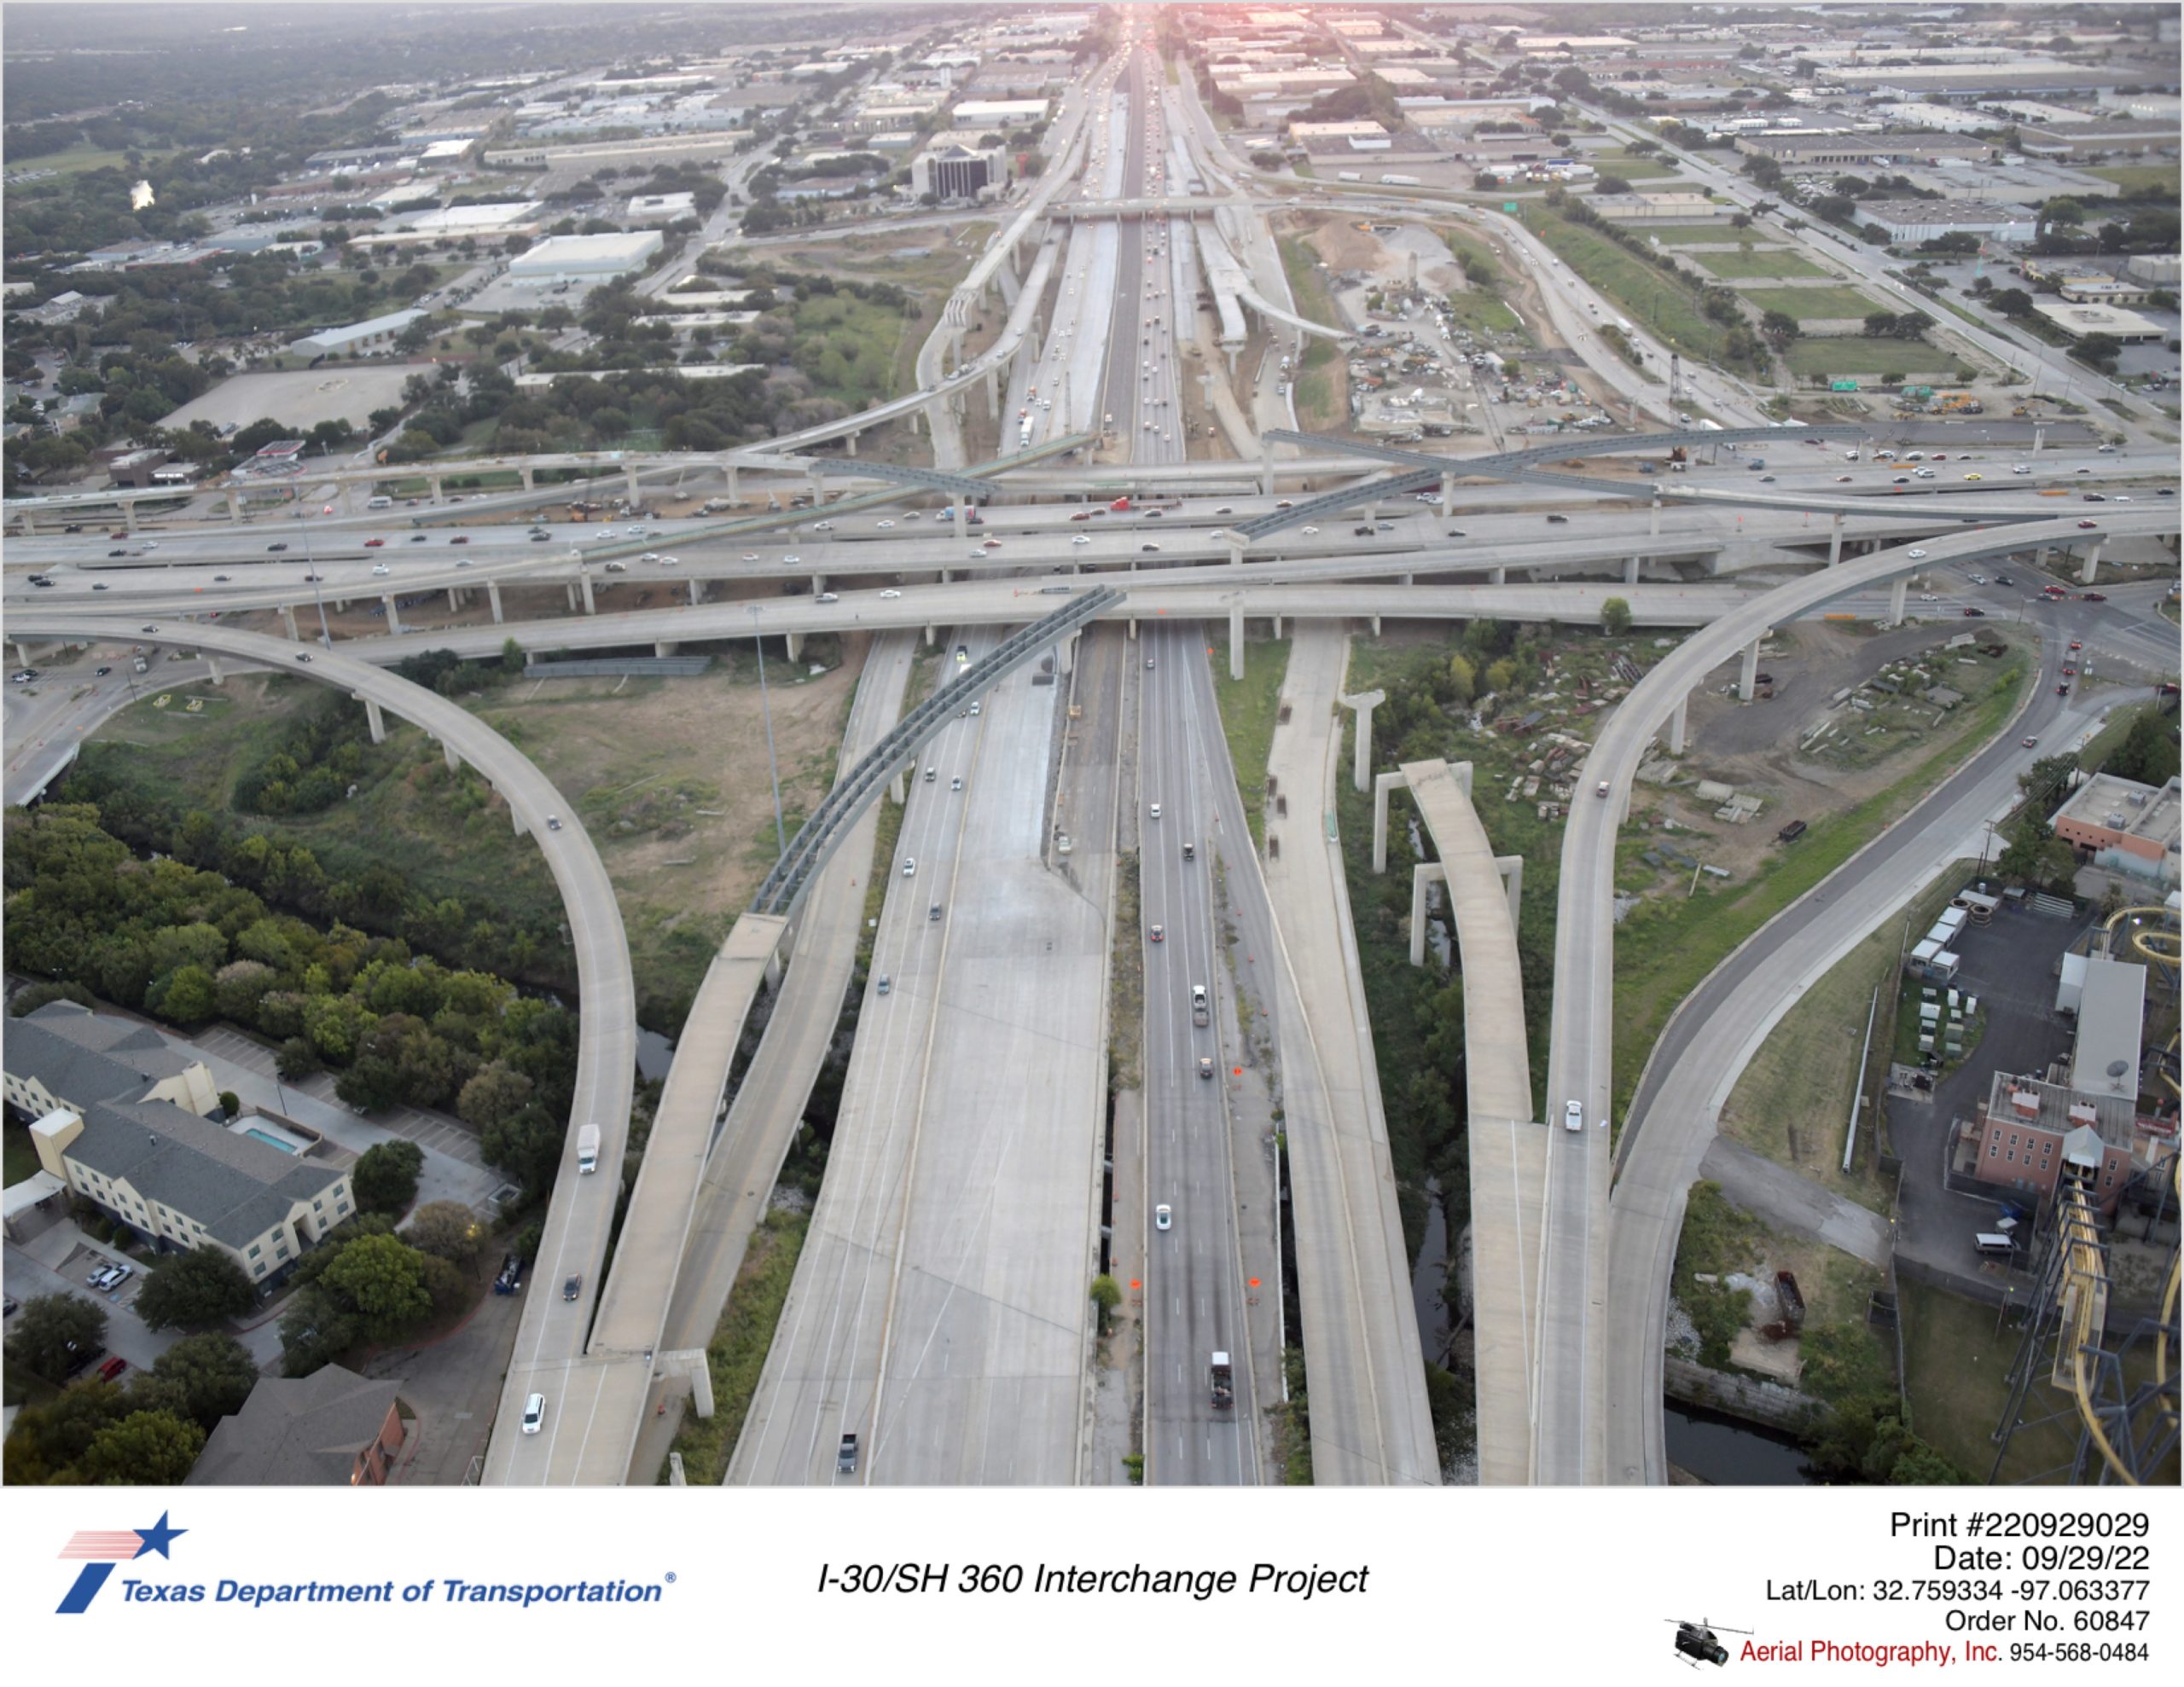 I-30 looking east at SH 360 interchange. Construction of direct connectors continues.